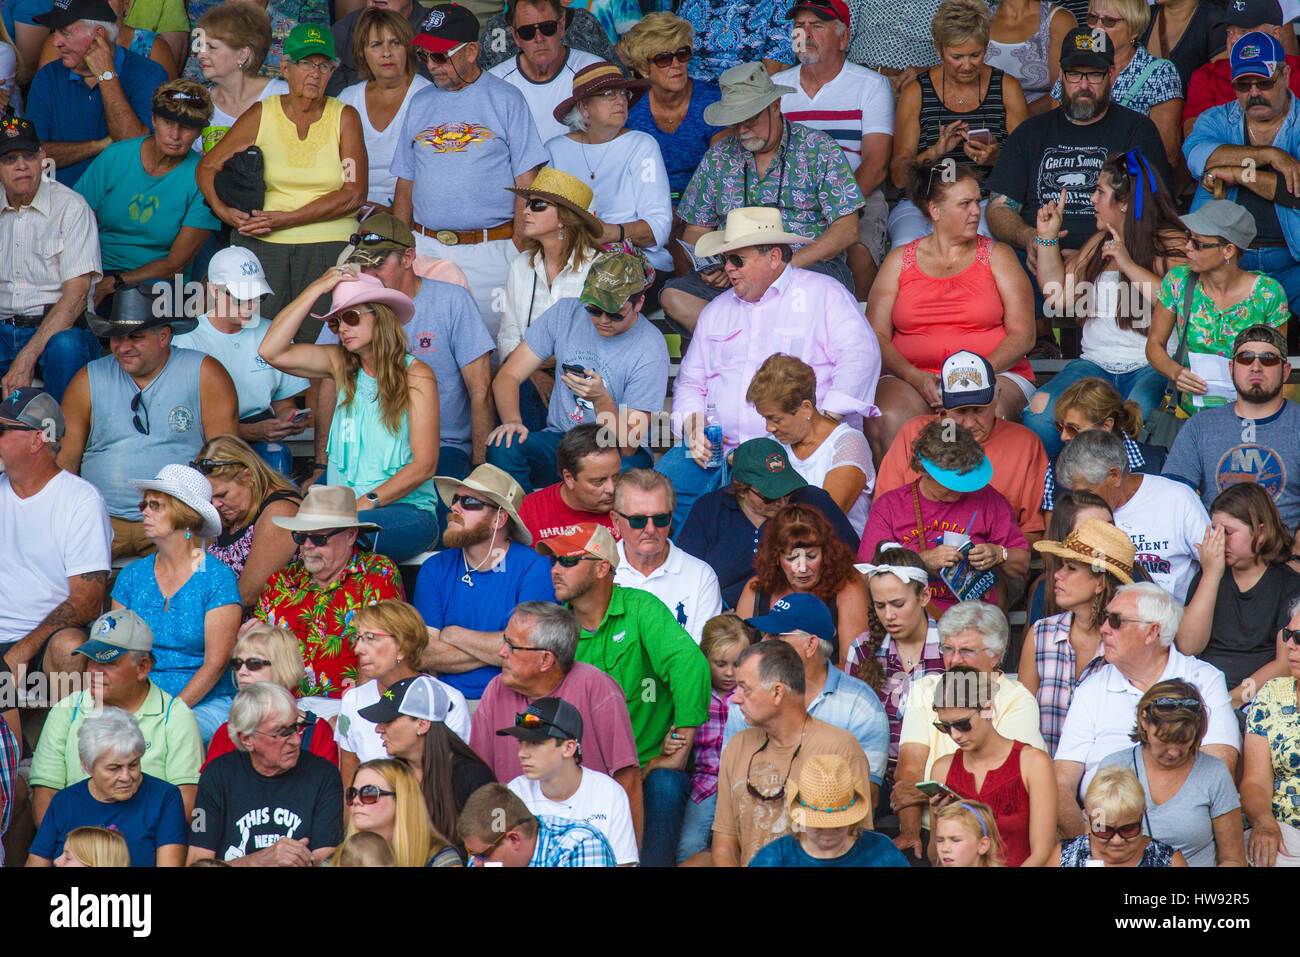 Crowd of people in bleachers at spectator sporting event Stock Photo